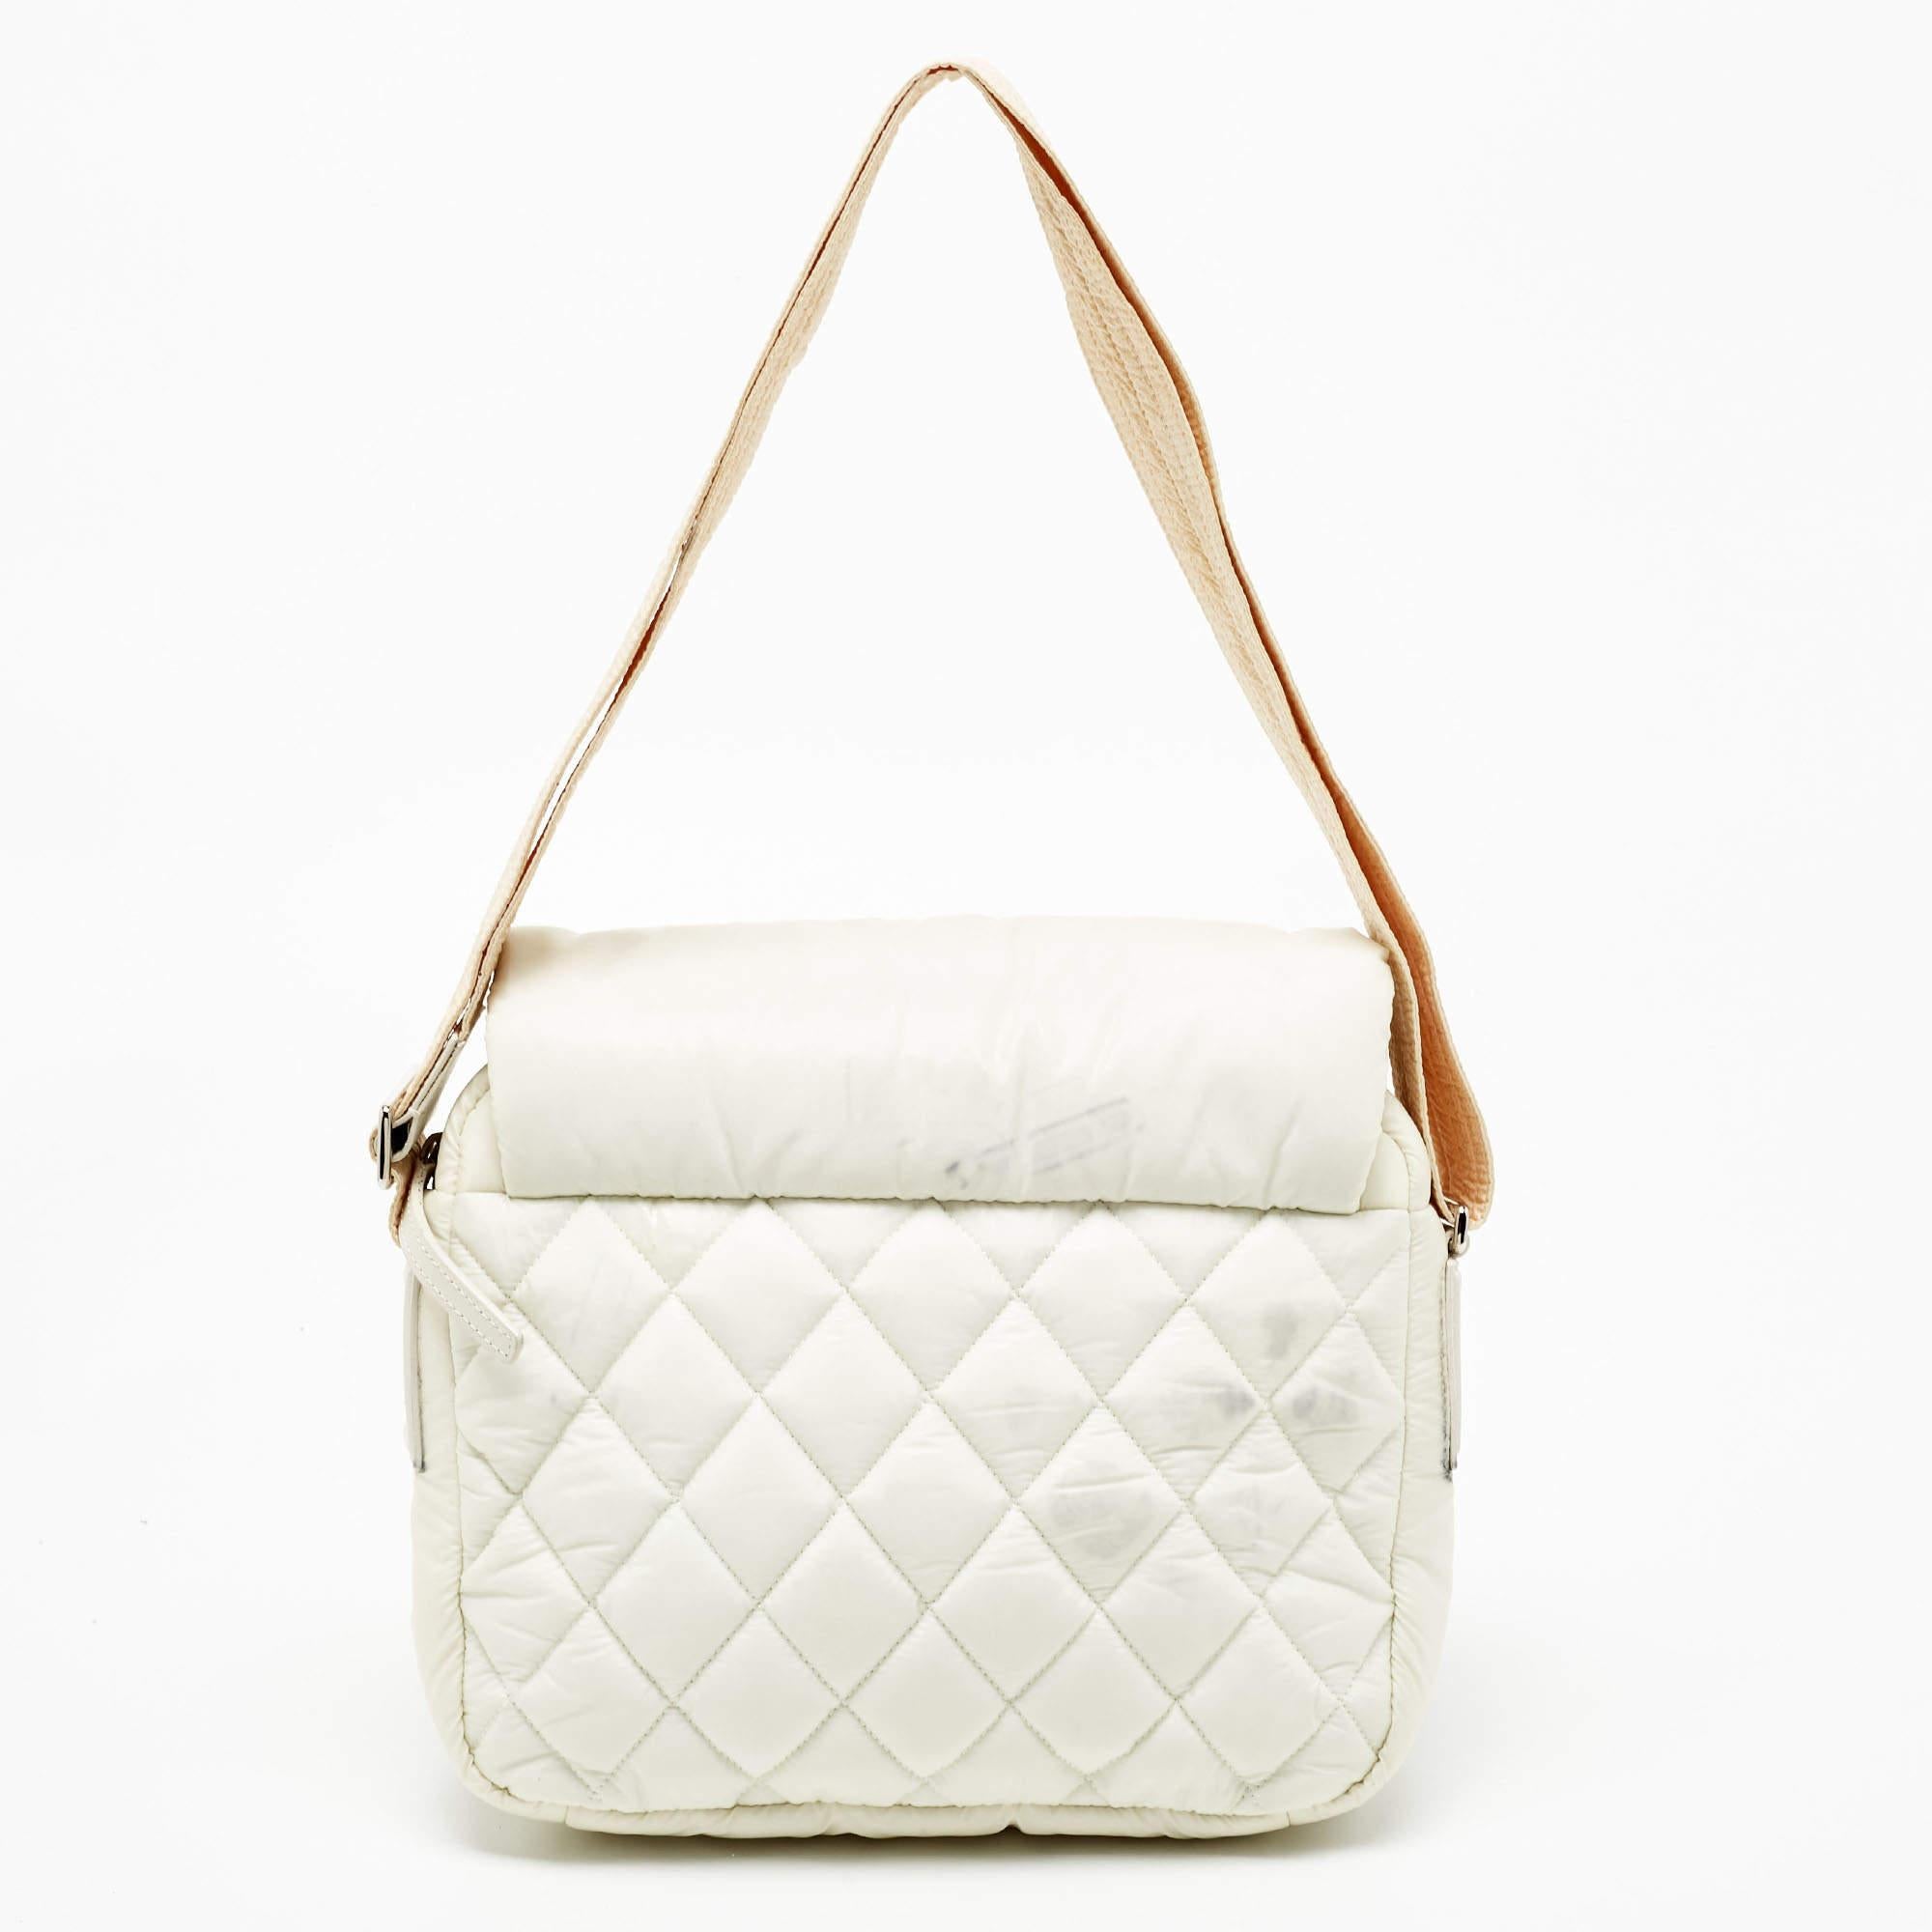 Handbags are more than just instruments to carry one's essentials. They essay one's sense of style, and the better the bag, the more confidence we get when we hold it. This Chanel white Coco Cocoon bag is meticulously made from luxe materials and